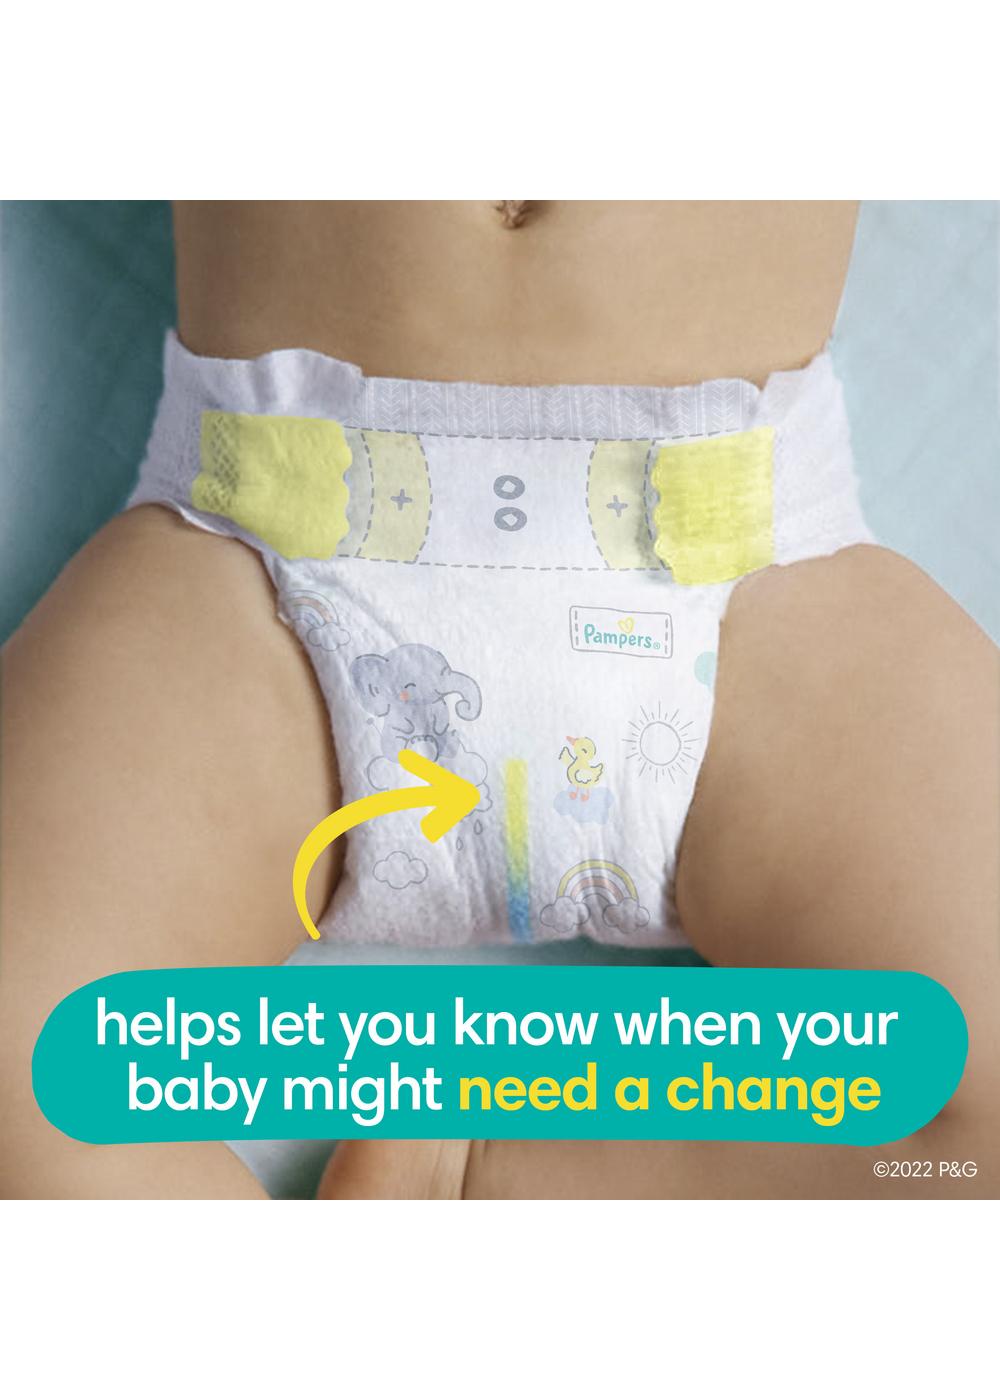 Pampers Swaddlers Newborn Diapers - Size 1; image 9 of 11